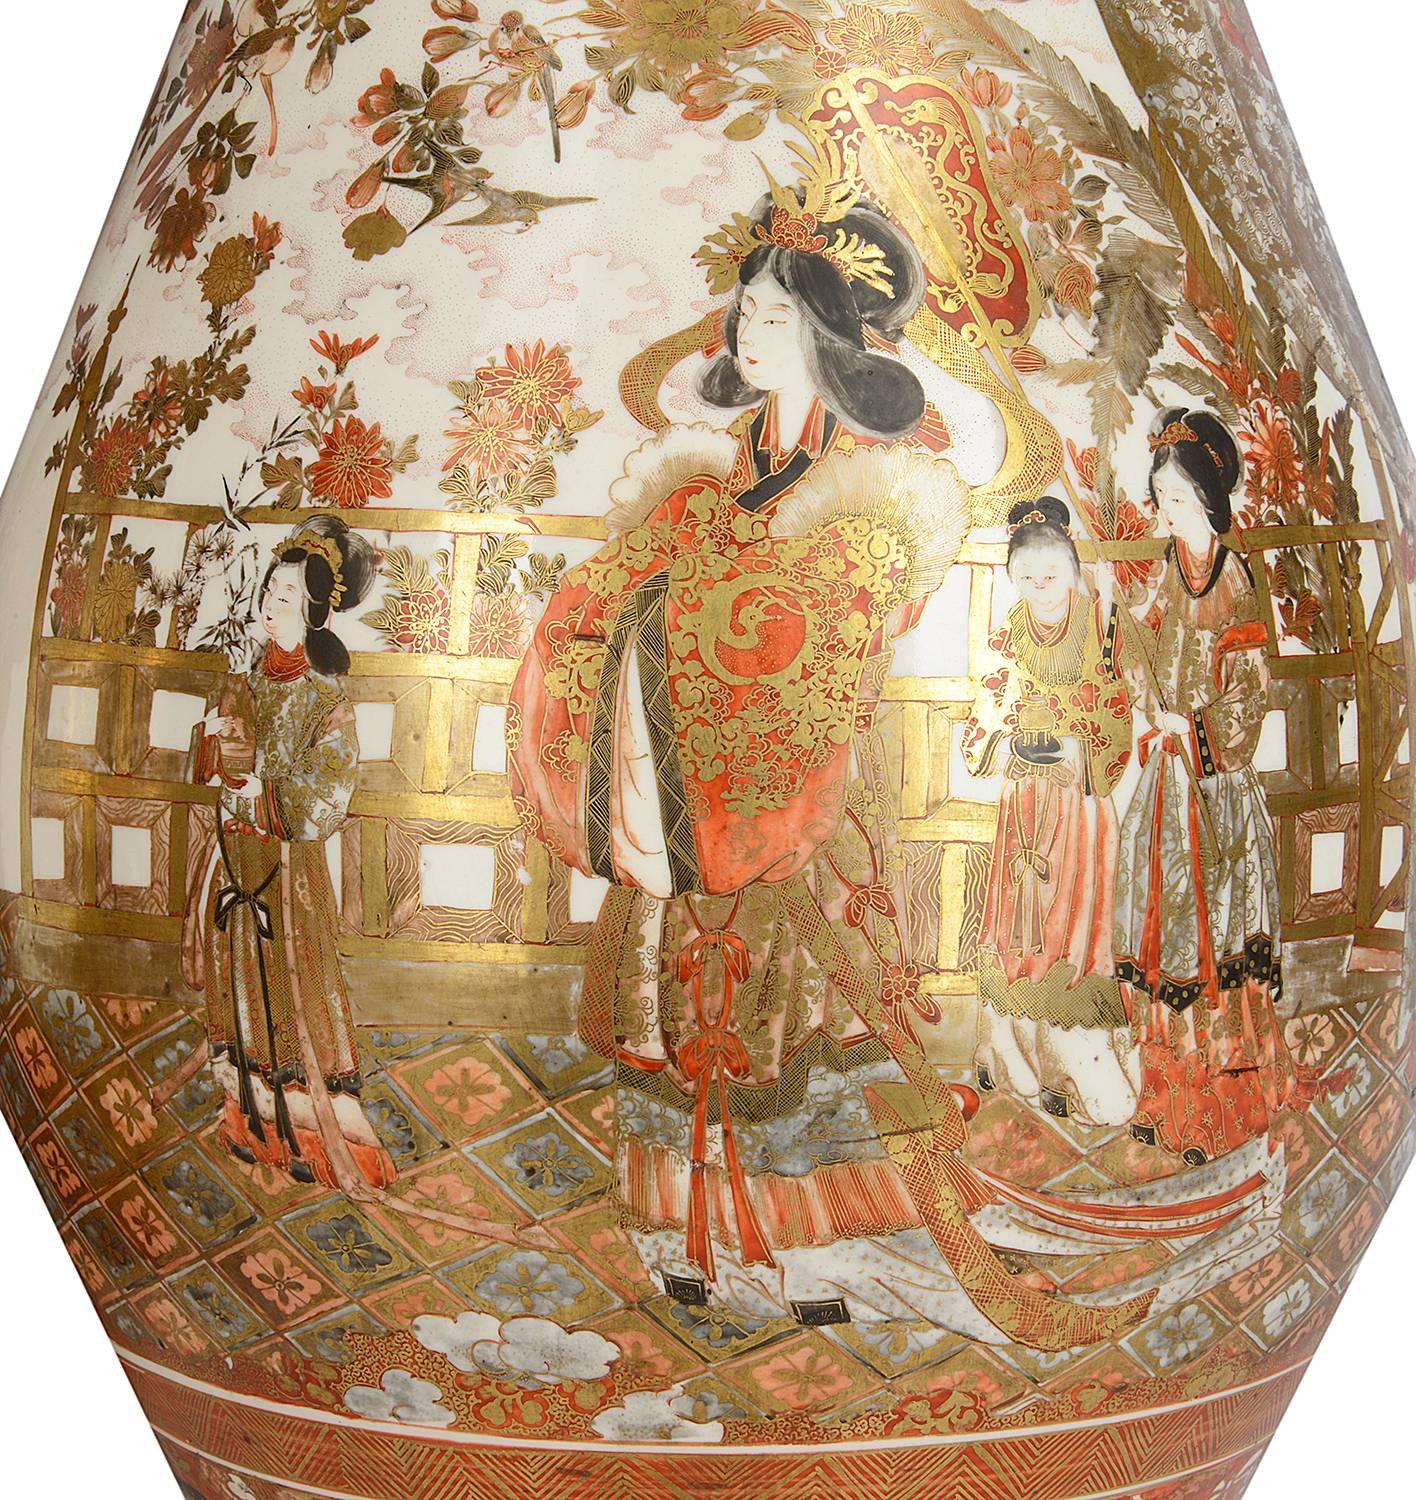 A very good quality pair of 19th century (Meiji period 1868-1912) Kutani vases, each with classical orange and gilded decoration, with motifs and flowers to the ground. Inset painted panels depicting geisha girls and children in gardens.
We can